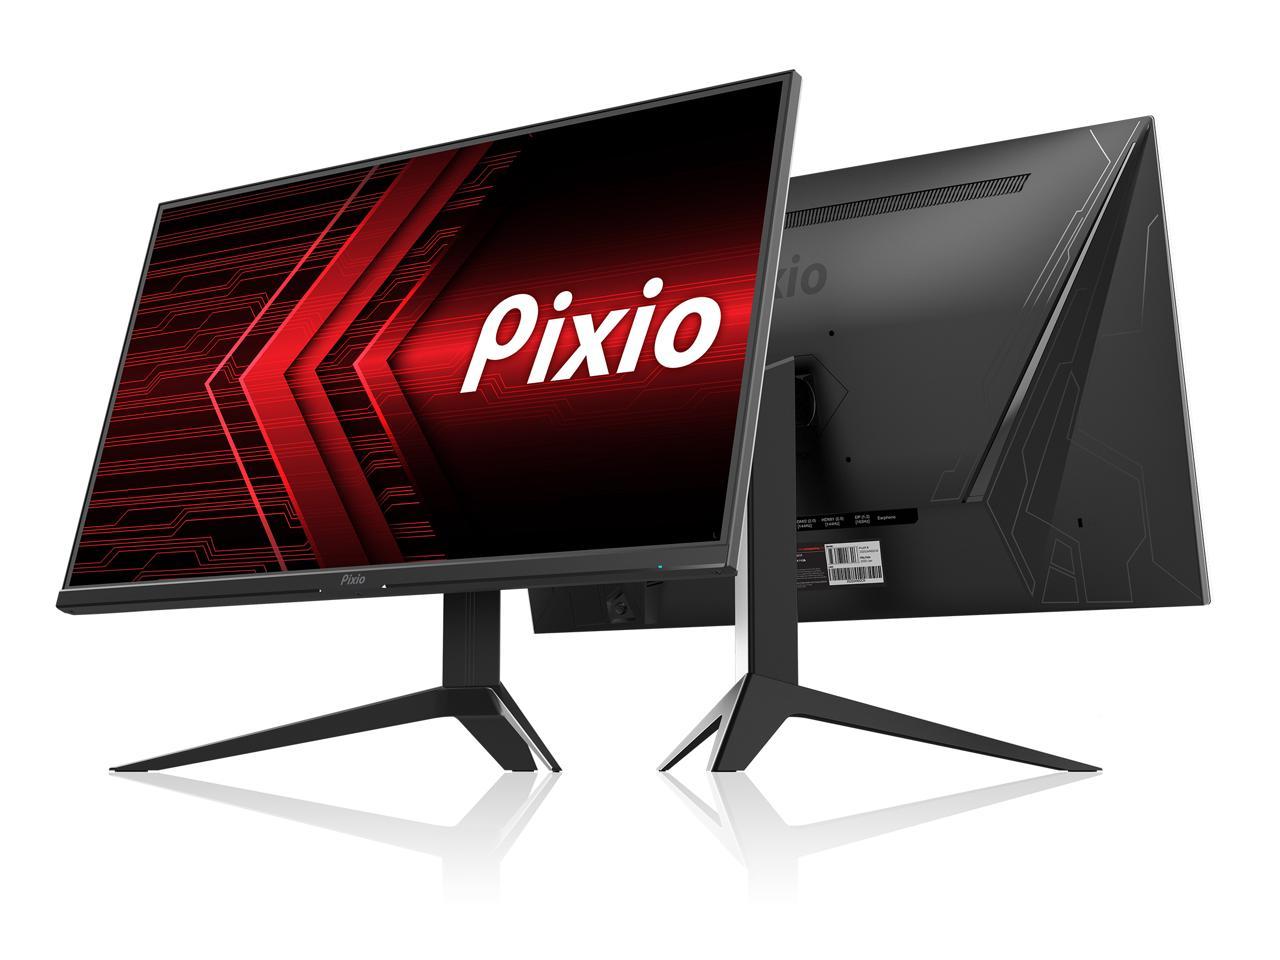 Pixio PX277 Prime 27 inch 2560 x 1440p 165Hz IPS HDR AMD FreeSync G-Sync Compatible Gaming Monitor $249.99